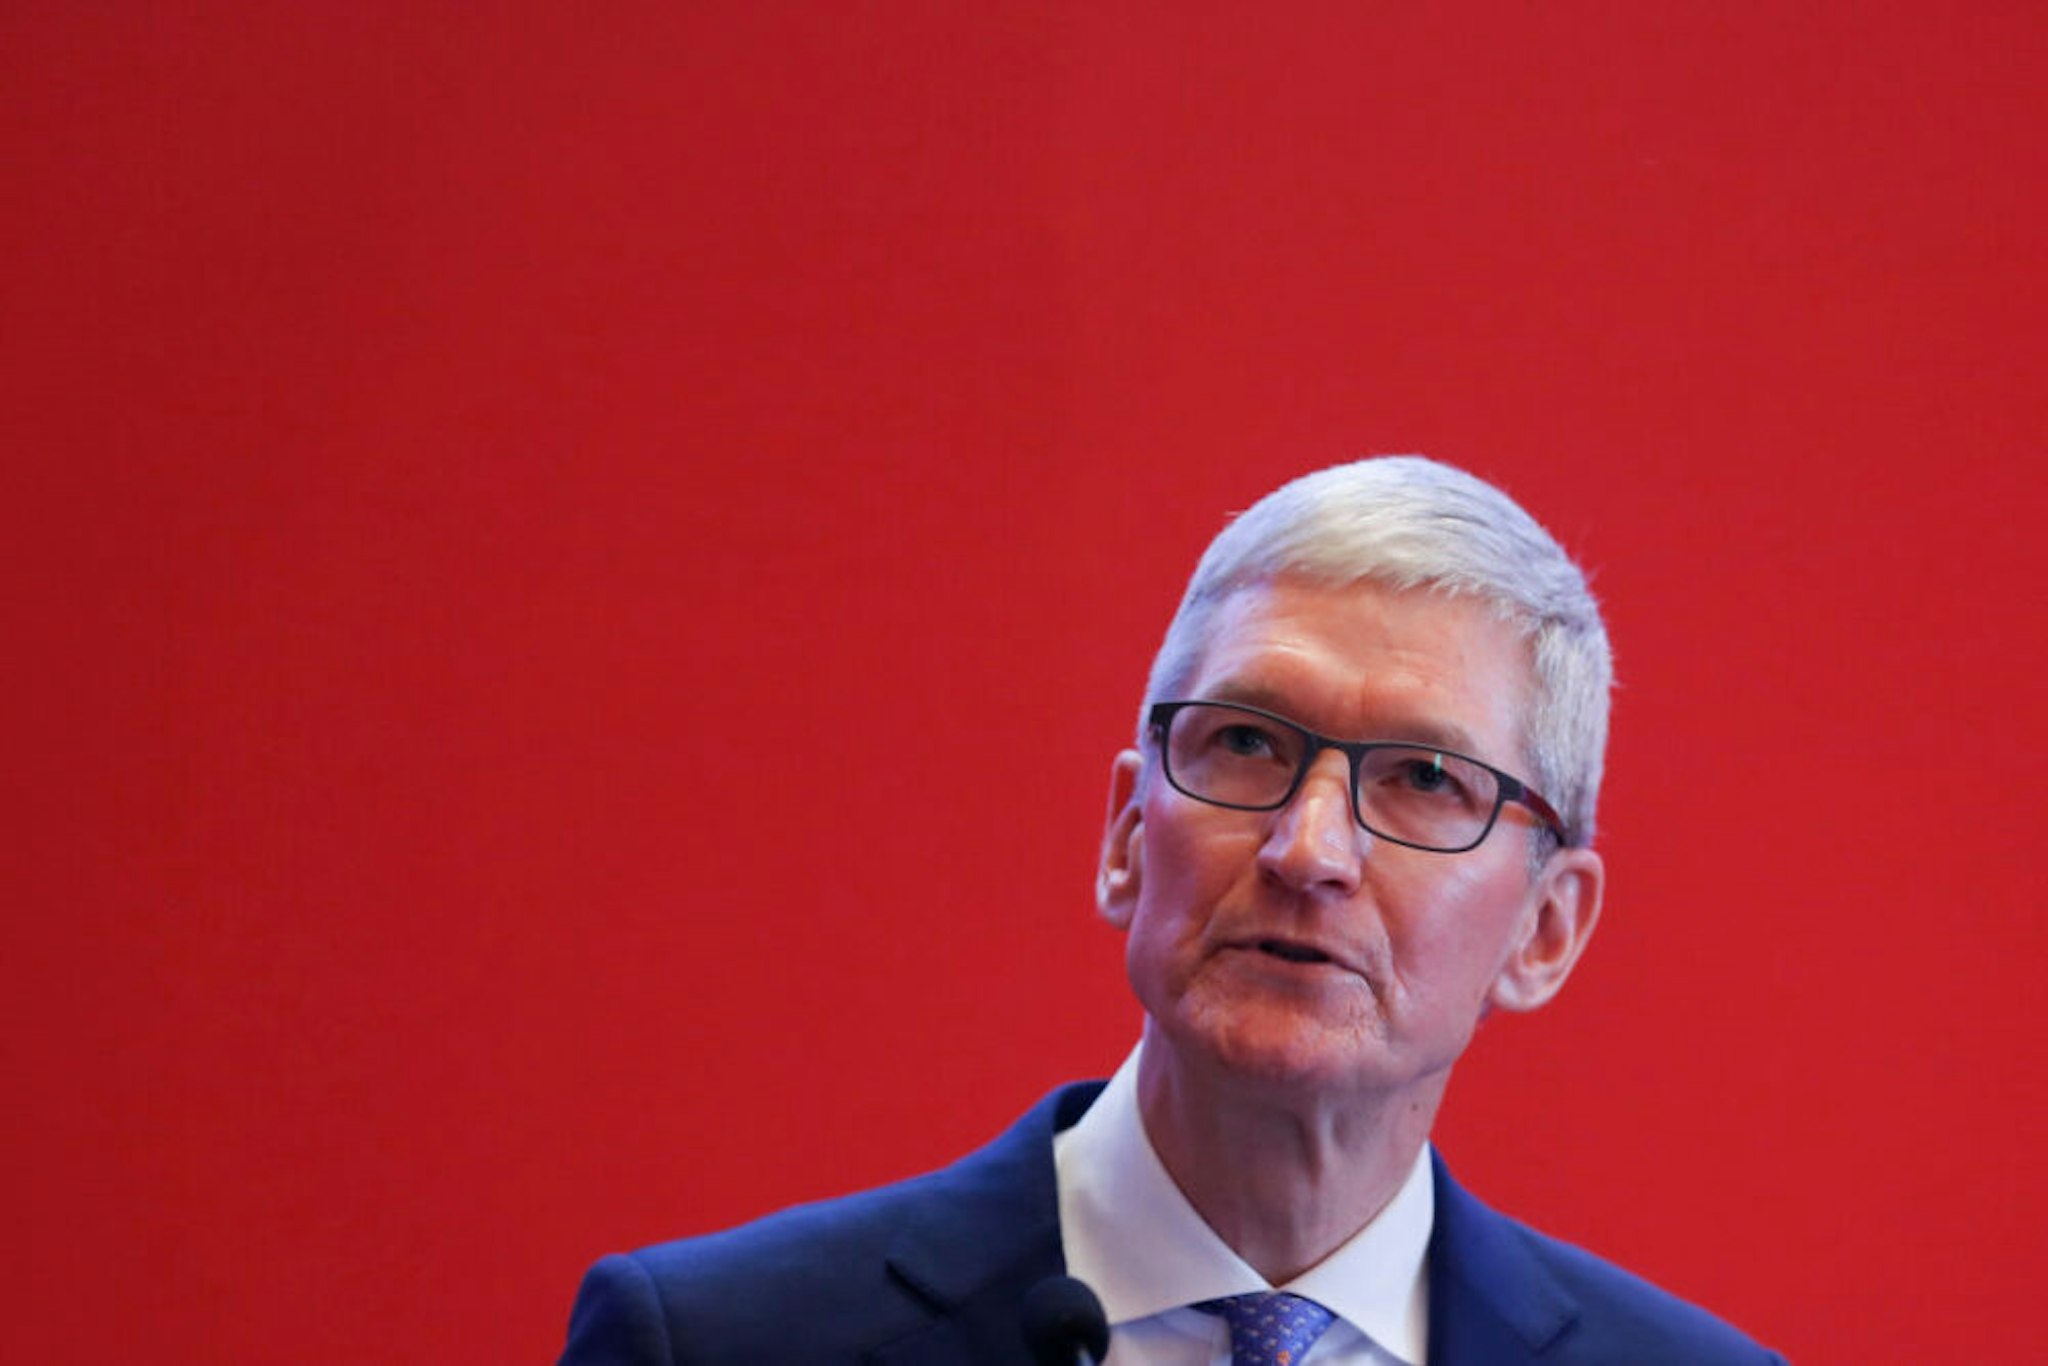 BEIJING, CHINA - MARCH 24: Apple Inc. CEO Tim Cook attends China Development Forum (CDF) 2018 at the Diaoyutai State Guesthouse on March 24, 2018 in Beijing, China. China Development Forum (CDF) 2018 is hosted by the Development Research Center of the State Council of China on March 24-26 in Beijing.